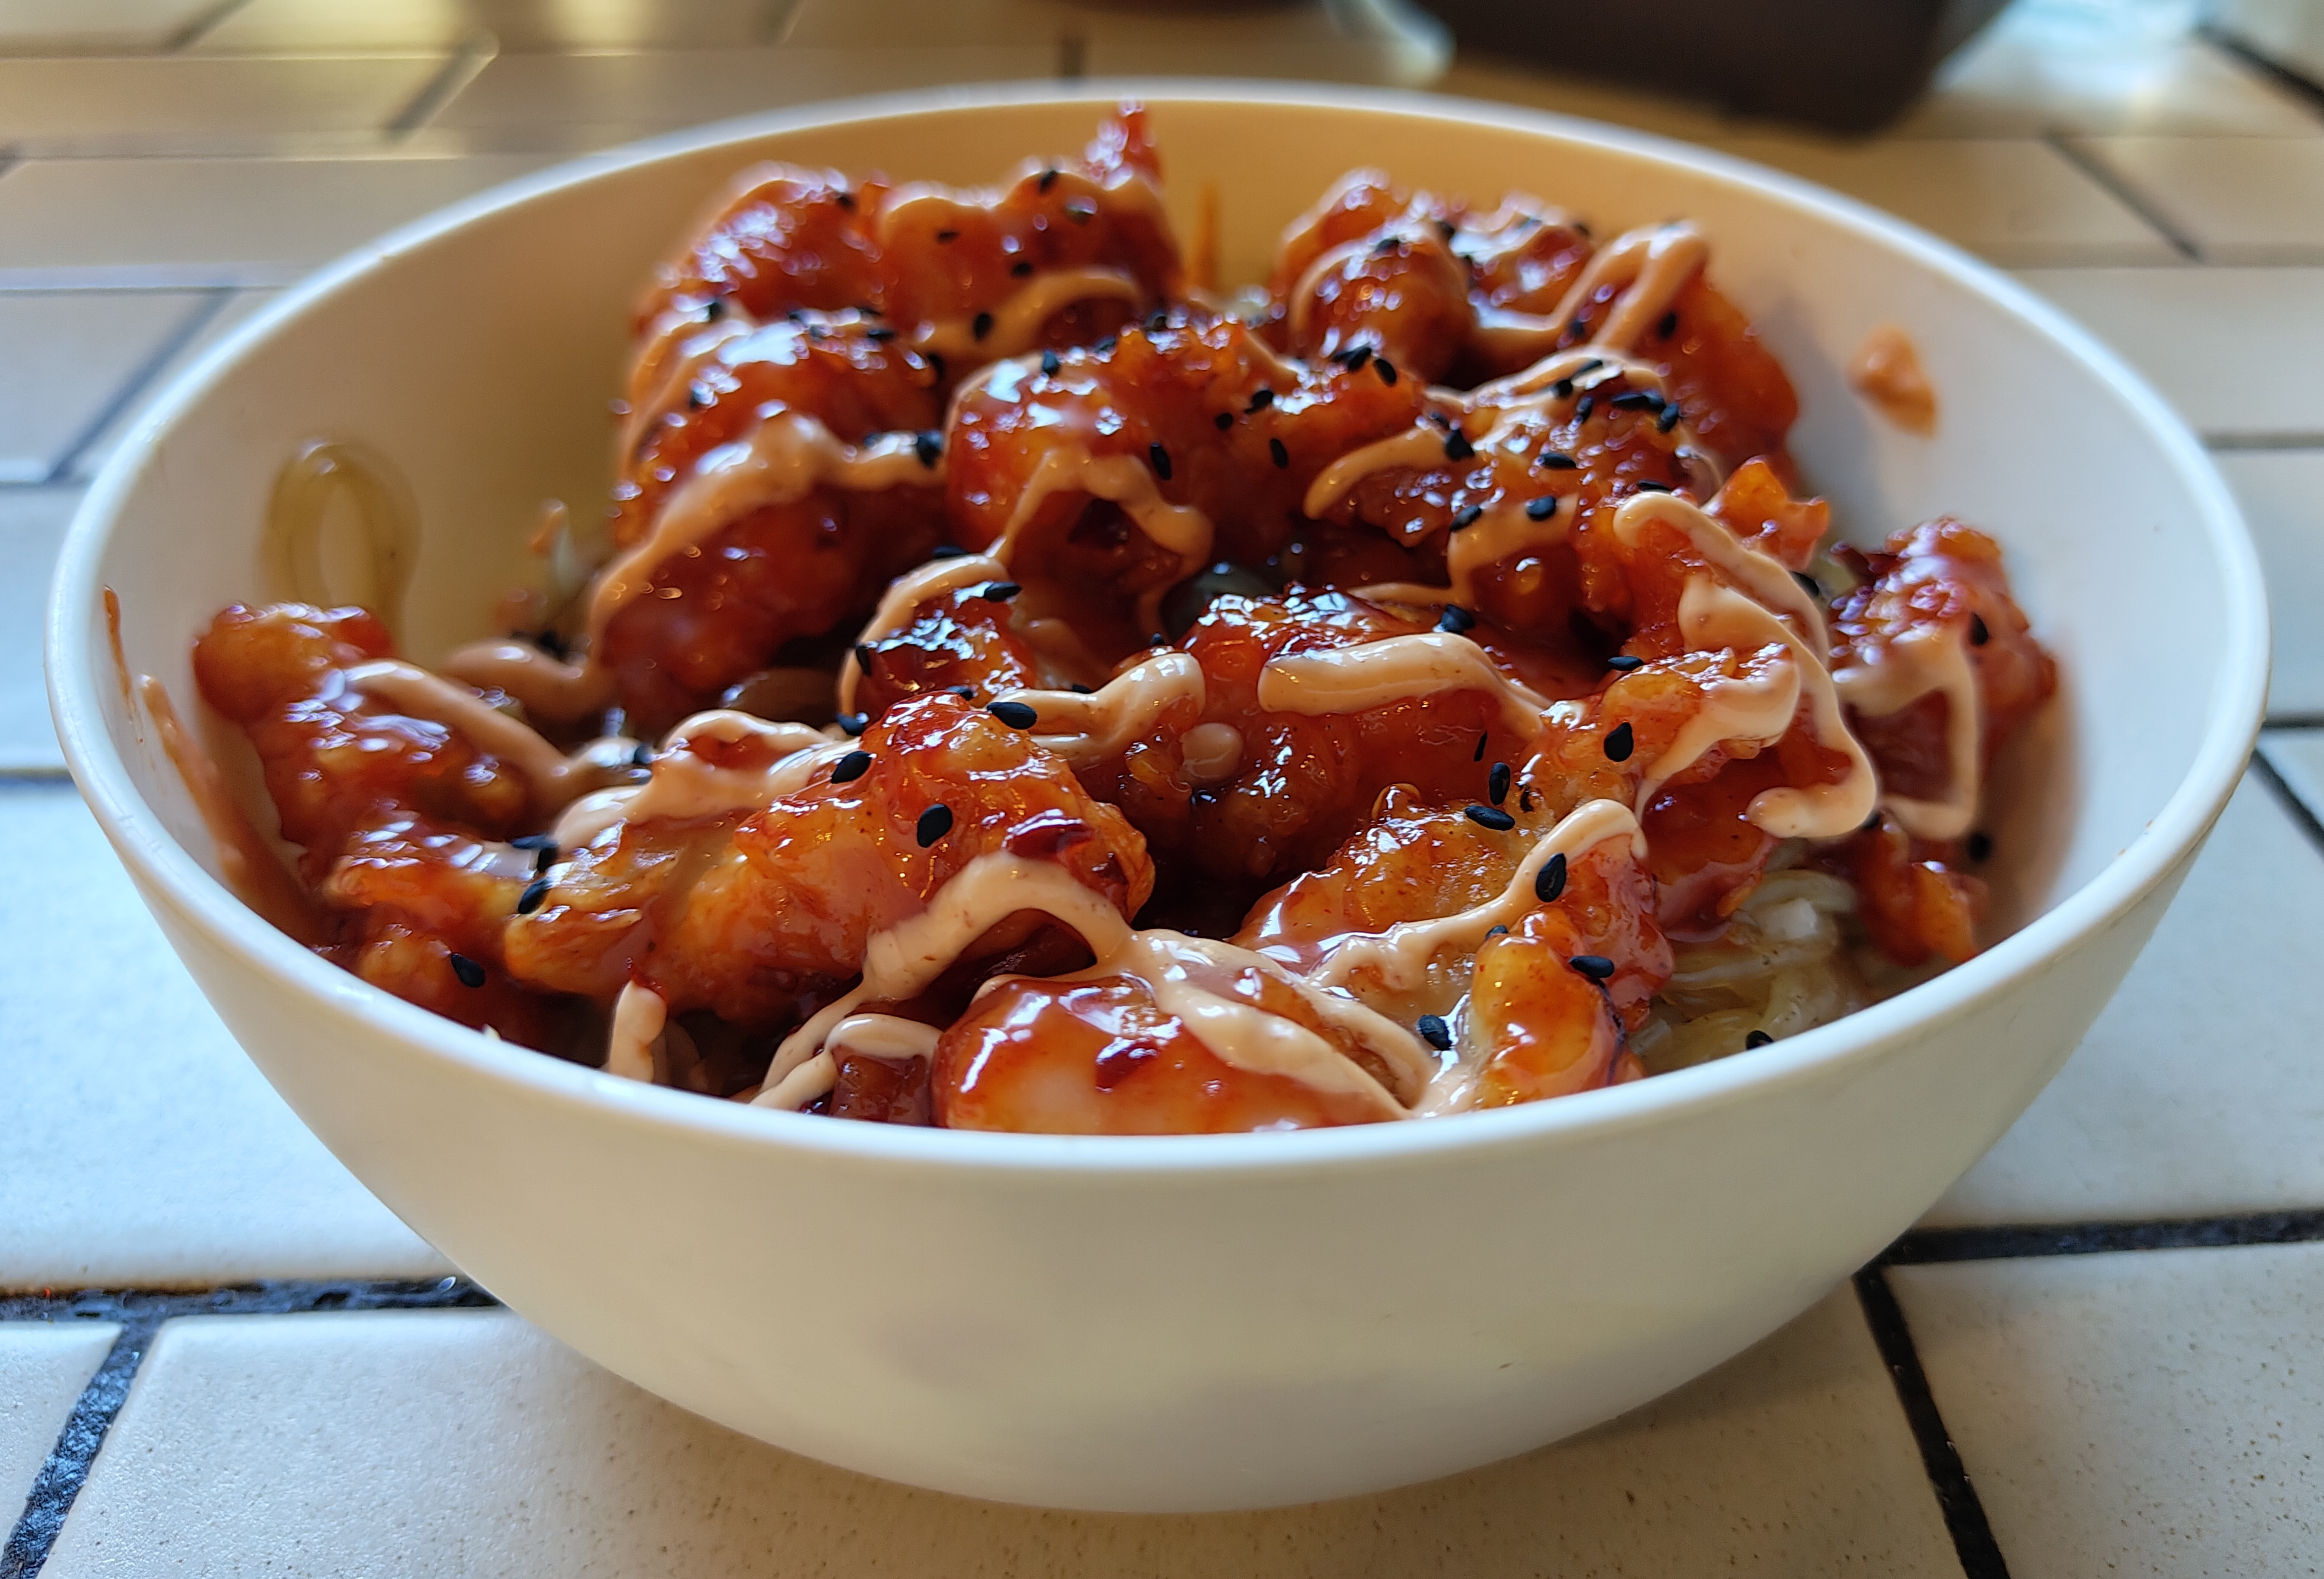 Bowl of CupBop where the chicken is glazed with spicy red sauce